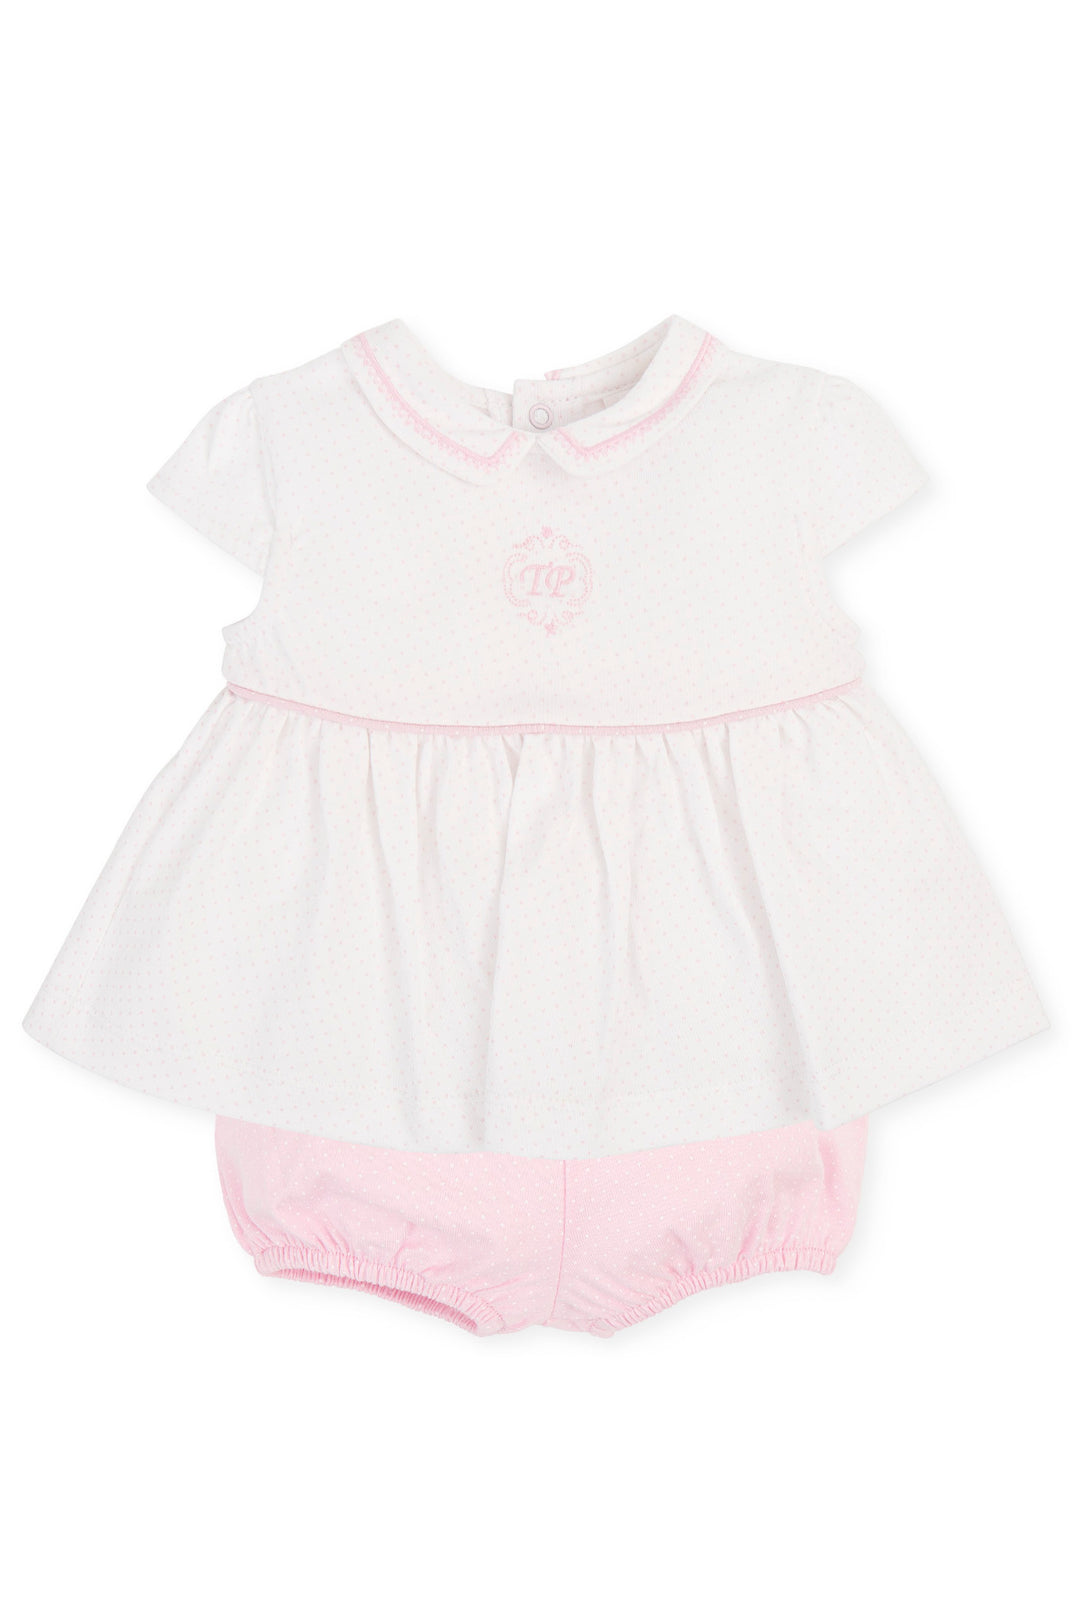 Tutto Piccolo "Joanie" Pink Polka Dot Blouse & Bloomers | Millie and John